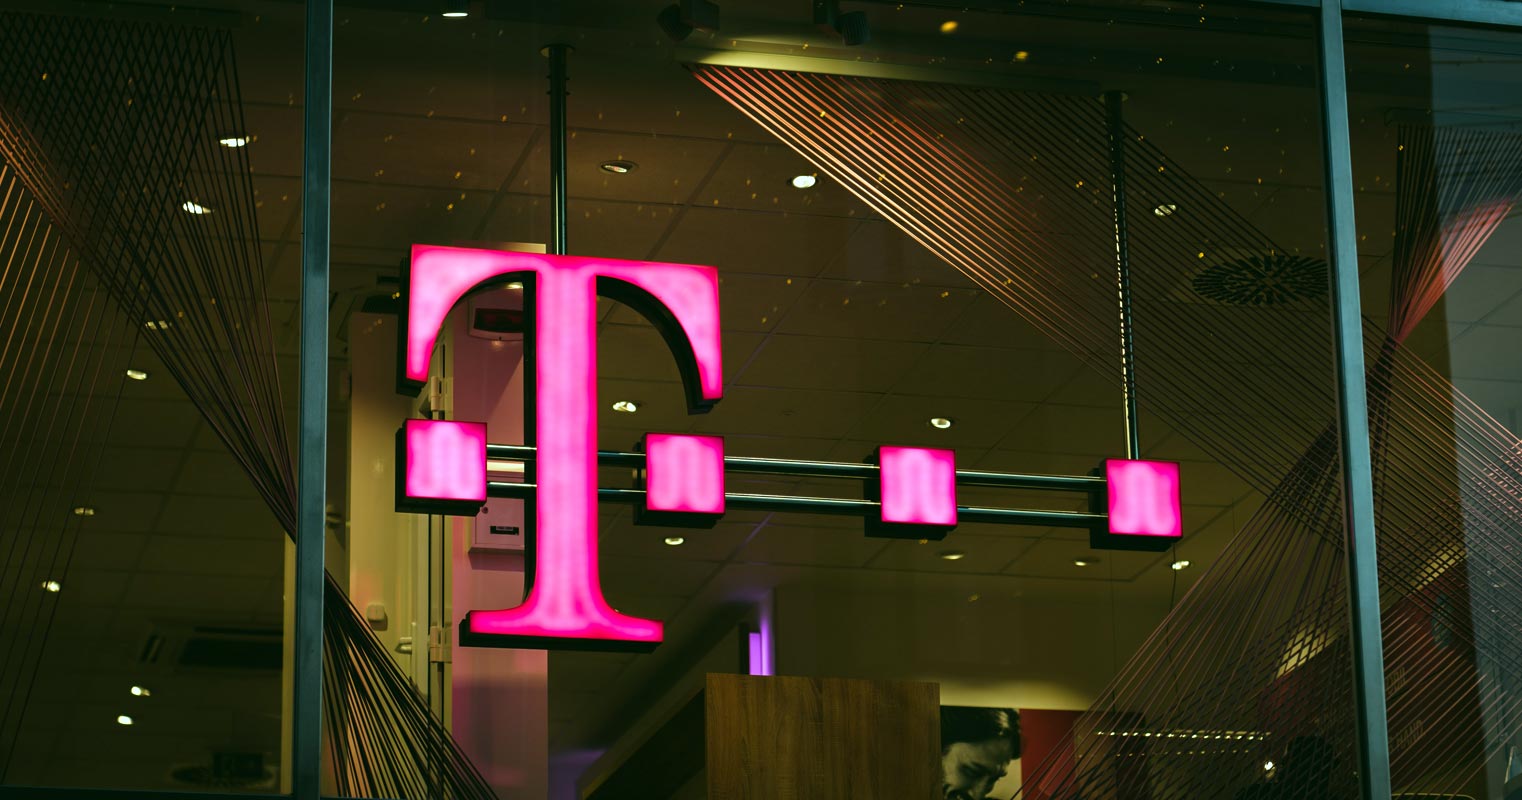 T-Mobile Logo in the Building